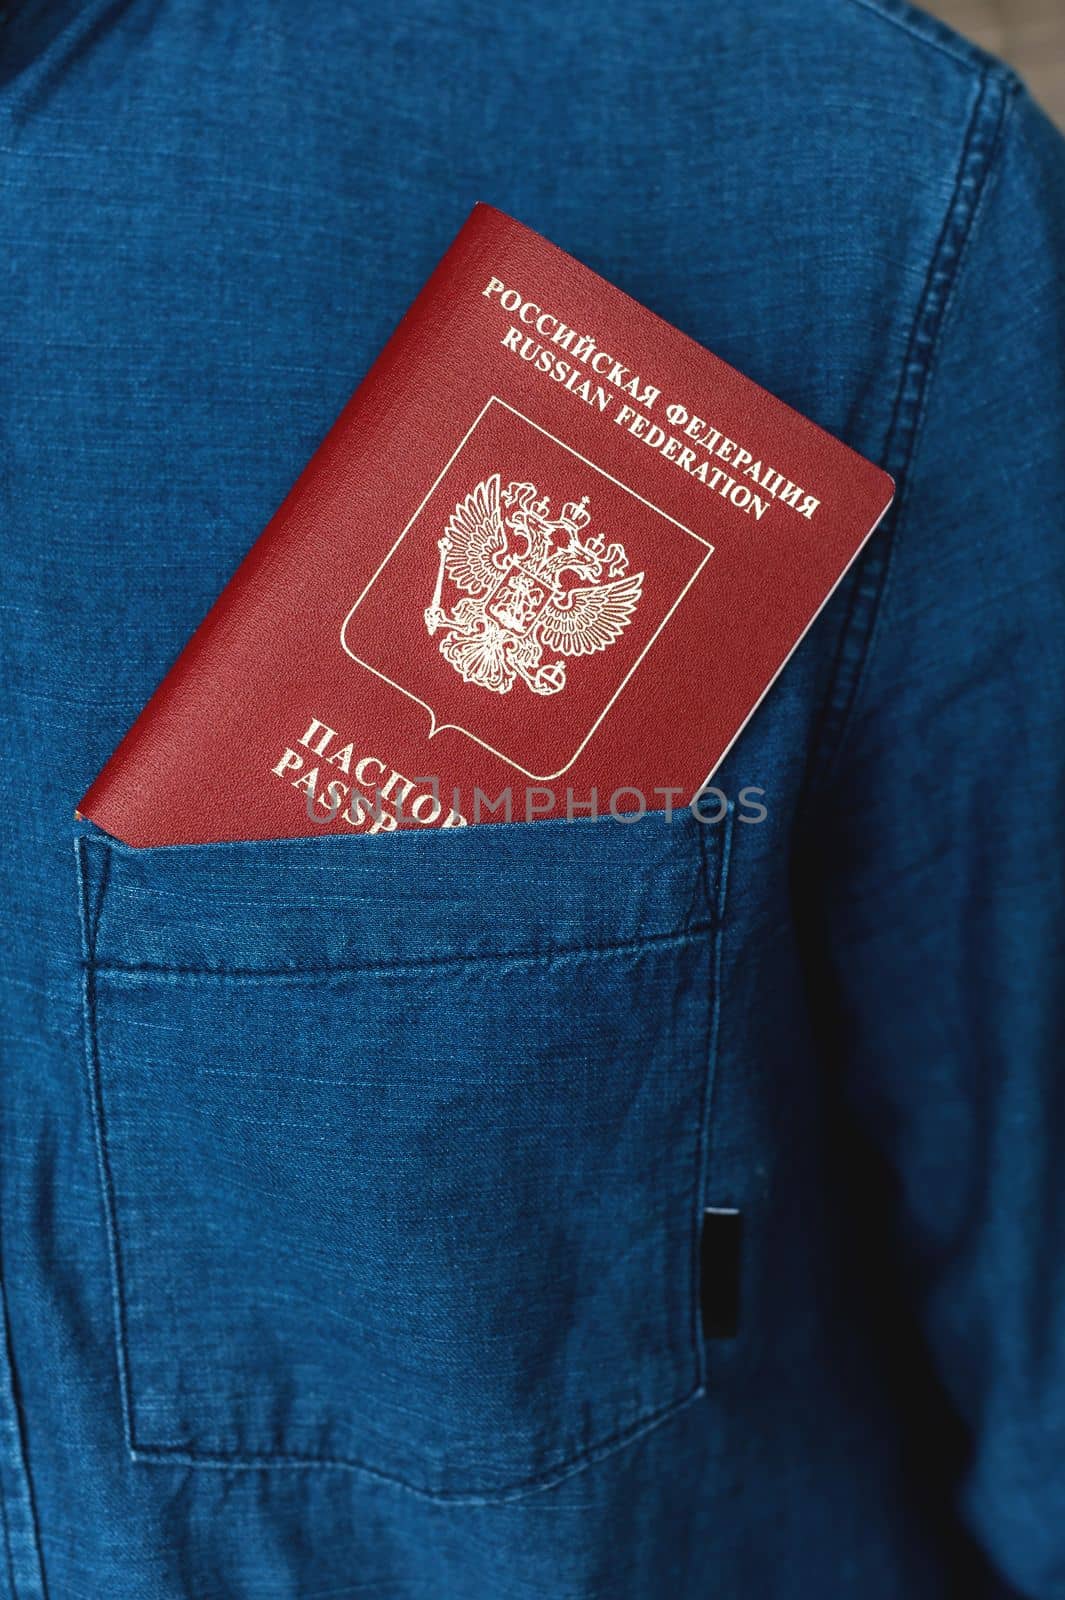 Passport in the pocket of a denim shirt close-up. Man without a face, breast pocket with identity document by yanik88